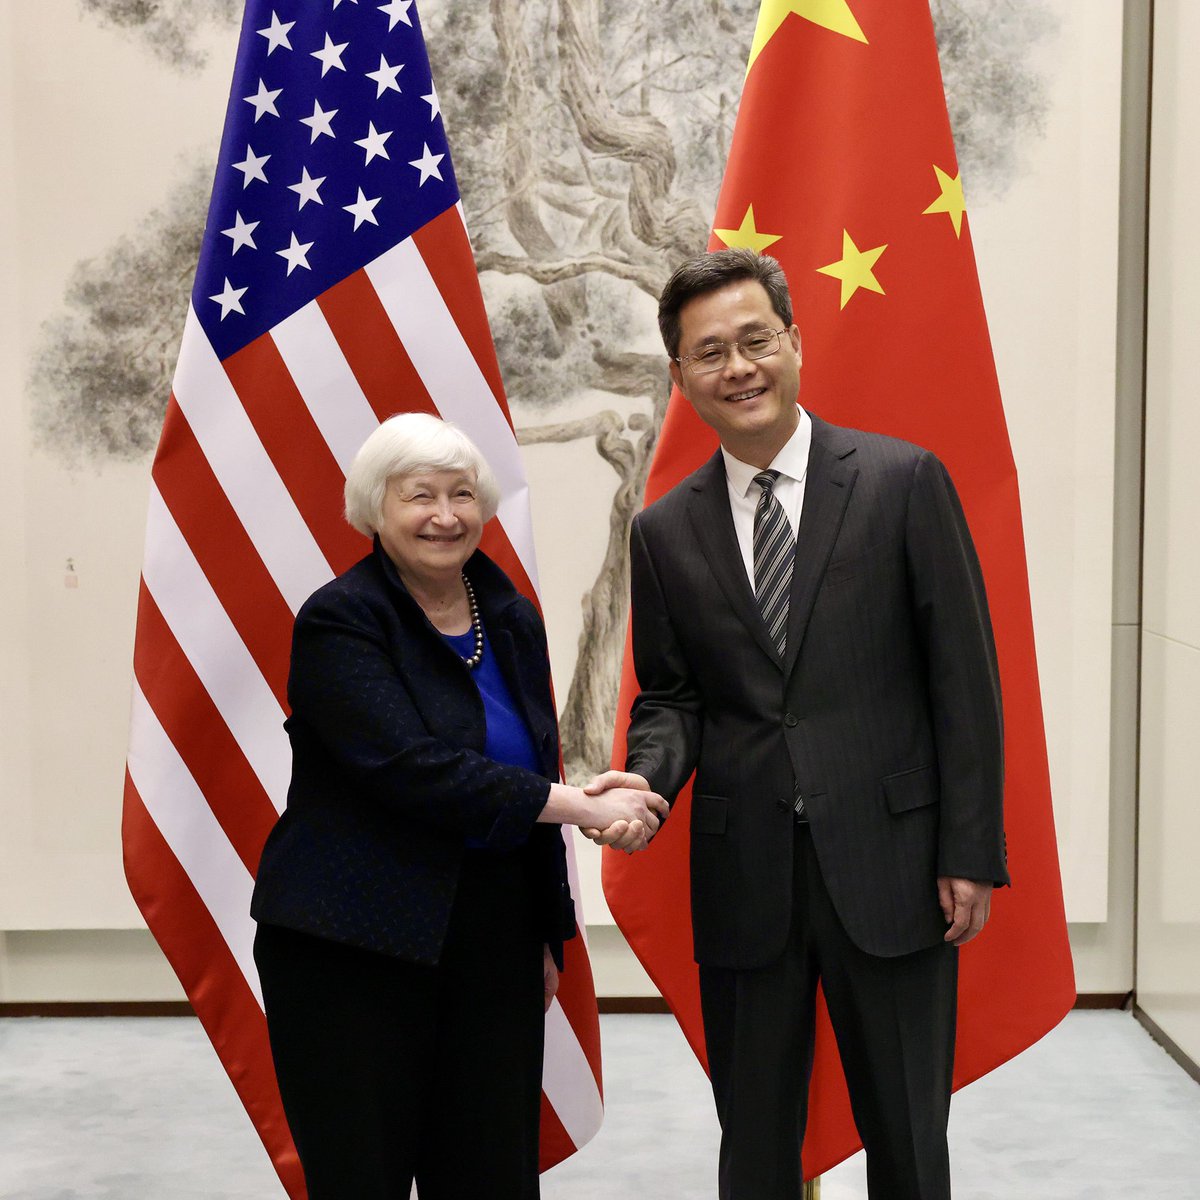 Yesterday in Beijing, I met with Finance Minister Lan Fo’an to discuss the bilateral economic relationship, and the important role @USTreasury and the Ministry of Finance can play in maintaining a durable communication channel between the U.S. and China.